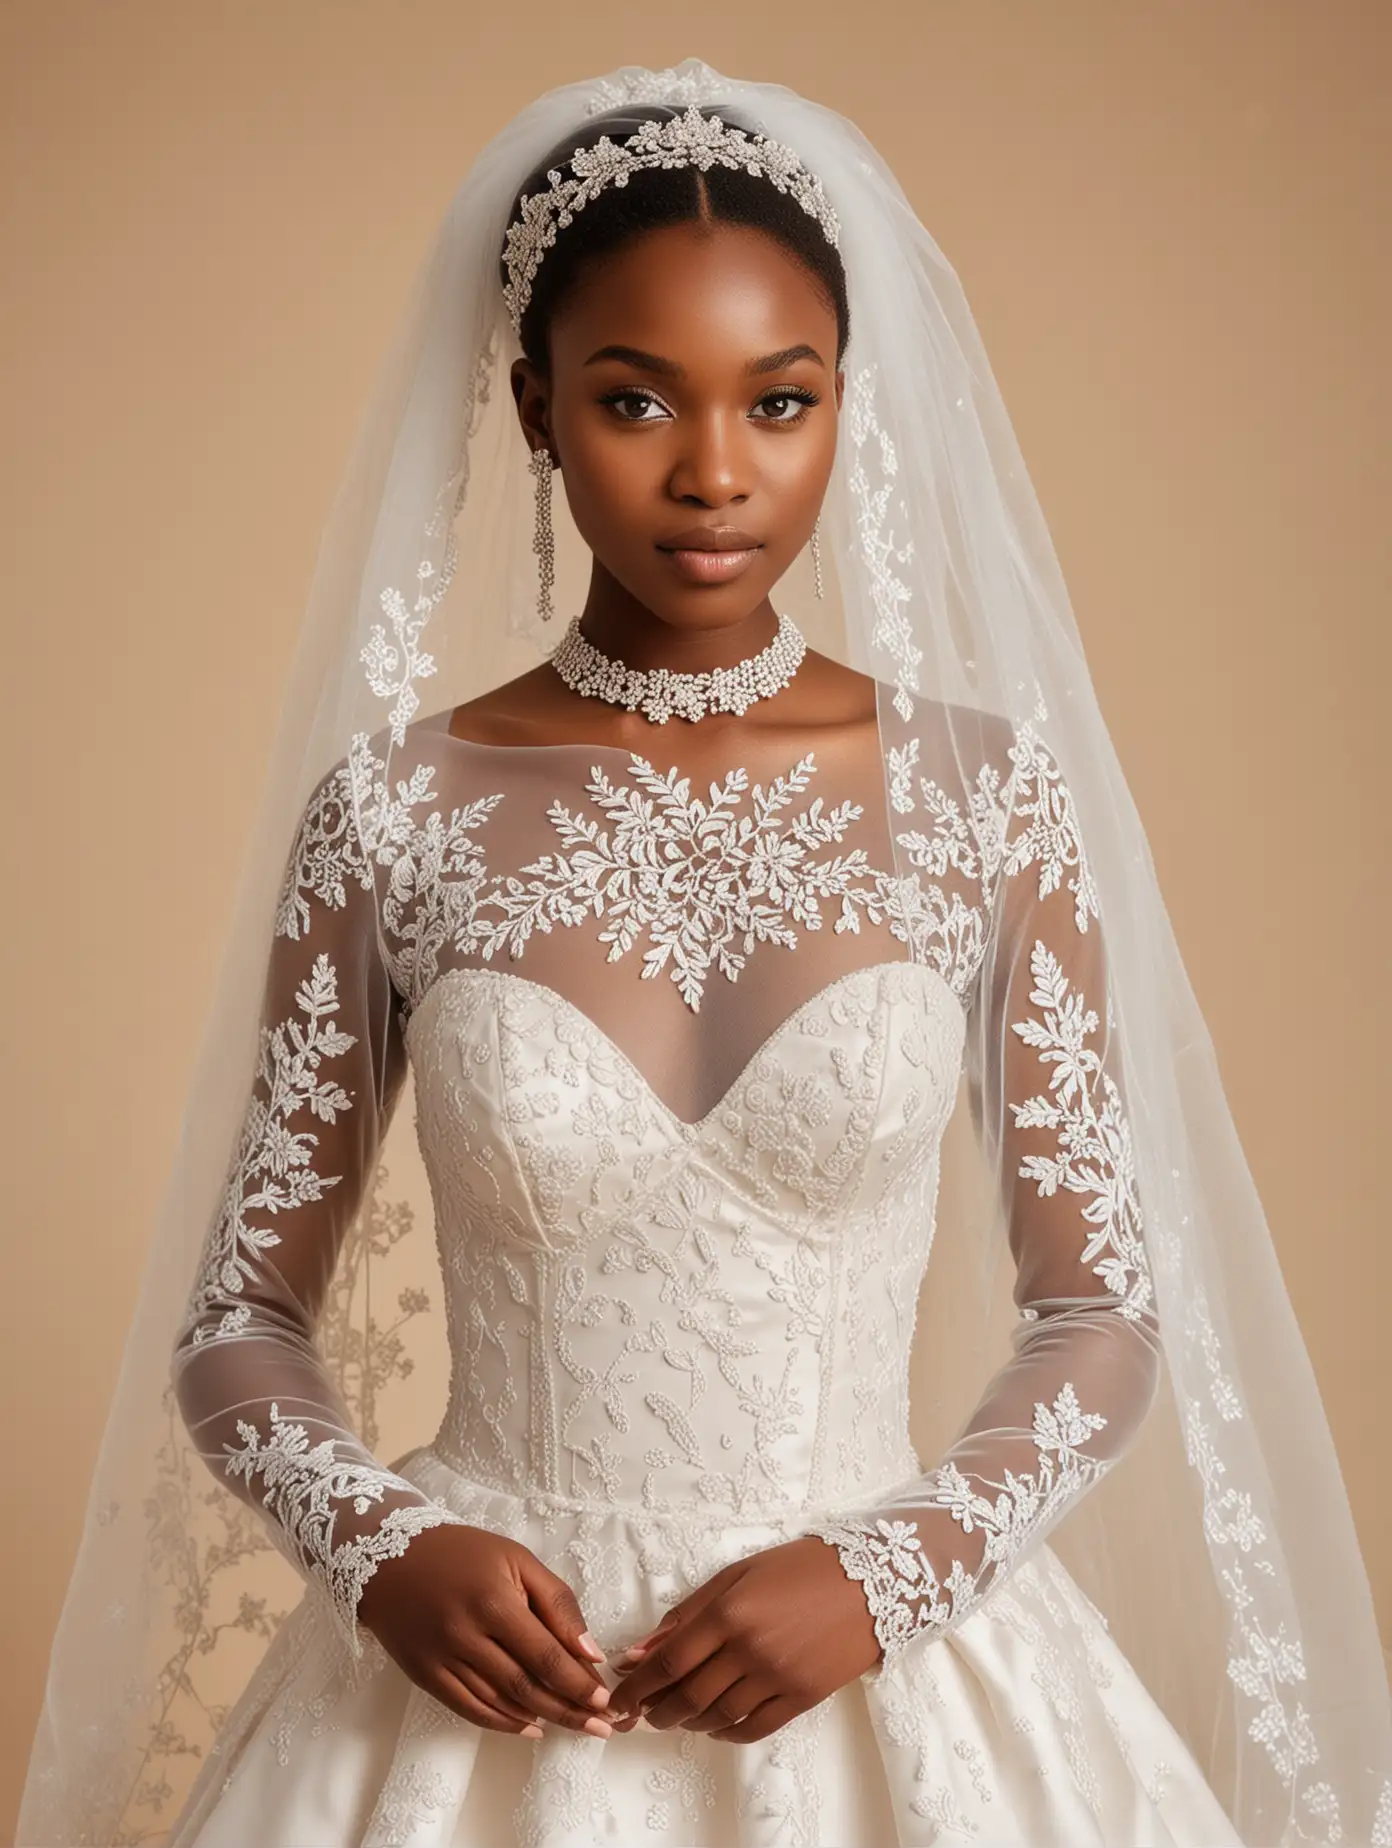 African girl，A stunning bride in her elegant wedding dress, showcasing the intricate lace and satin details of the bodice with a beautiful Aline skirt. She wears an exquisite veil that adds to her grace as she poses for highly detailed photography, capturing every detail on neutral background